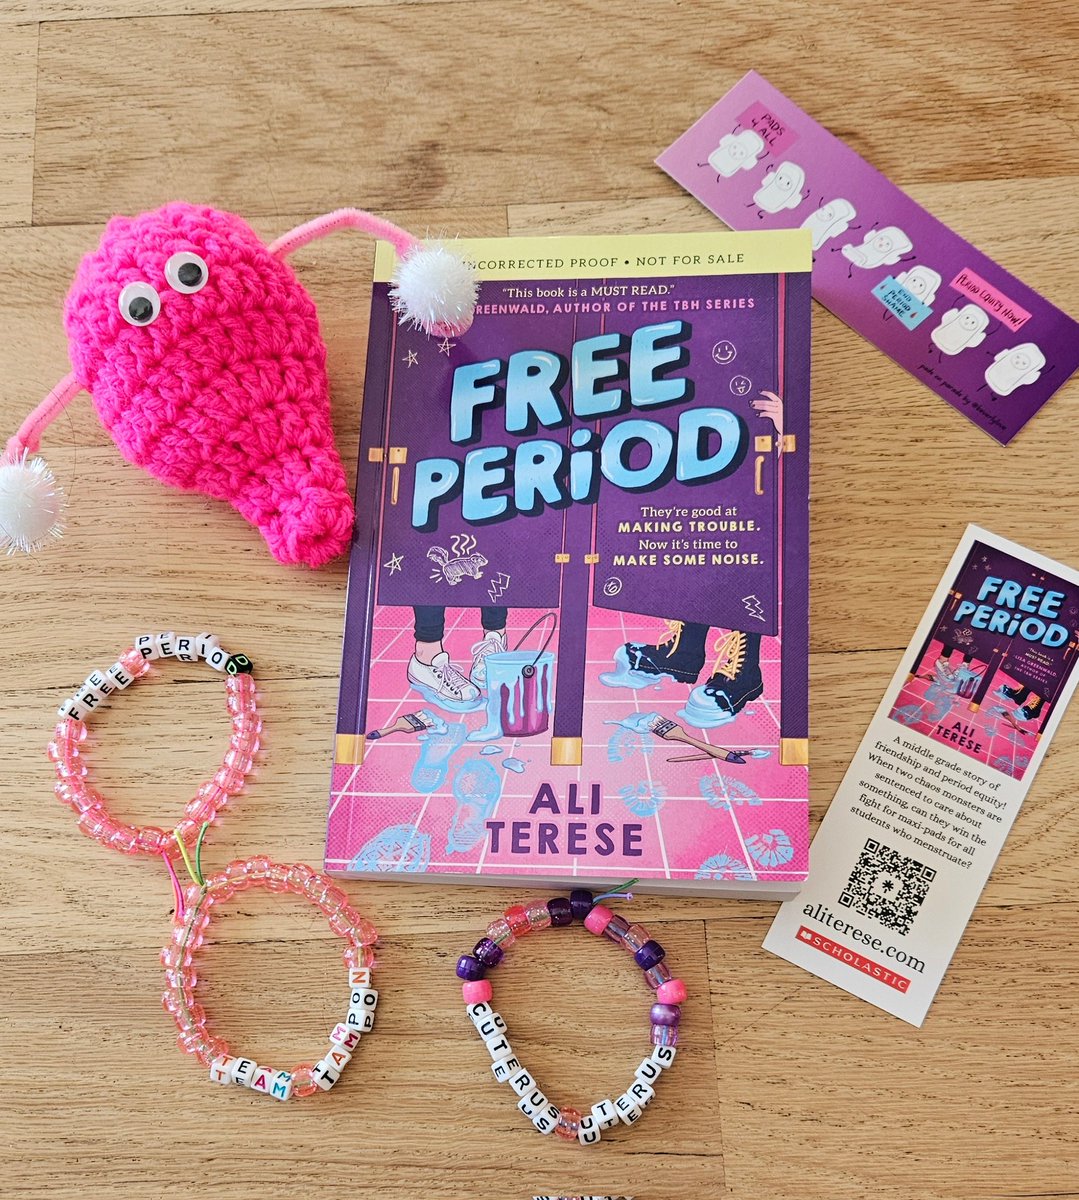 I just finished FREE PERIOD by Ali Terese and it is SUCH a cleverly written story promoting period equity. Funny, dynamic chaos monsters (Helen and Gracie) go from pranks to plans in this wonderful MG story that should be in every classroom! Comes out in March! Add to TBR!